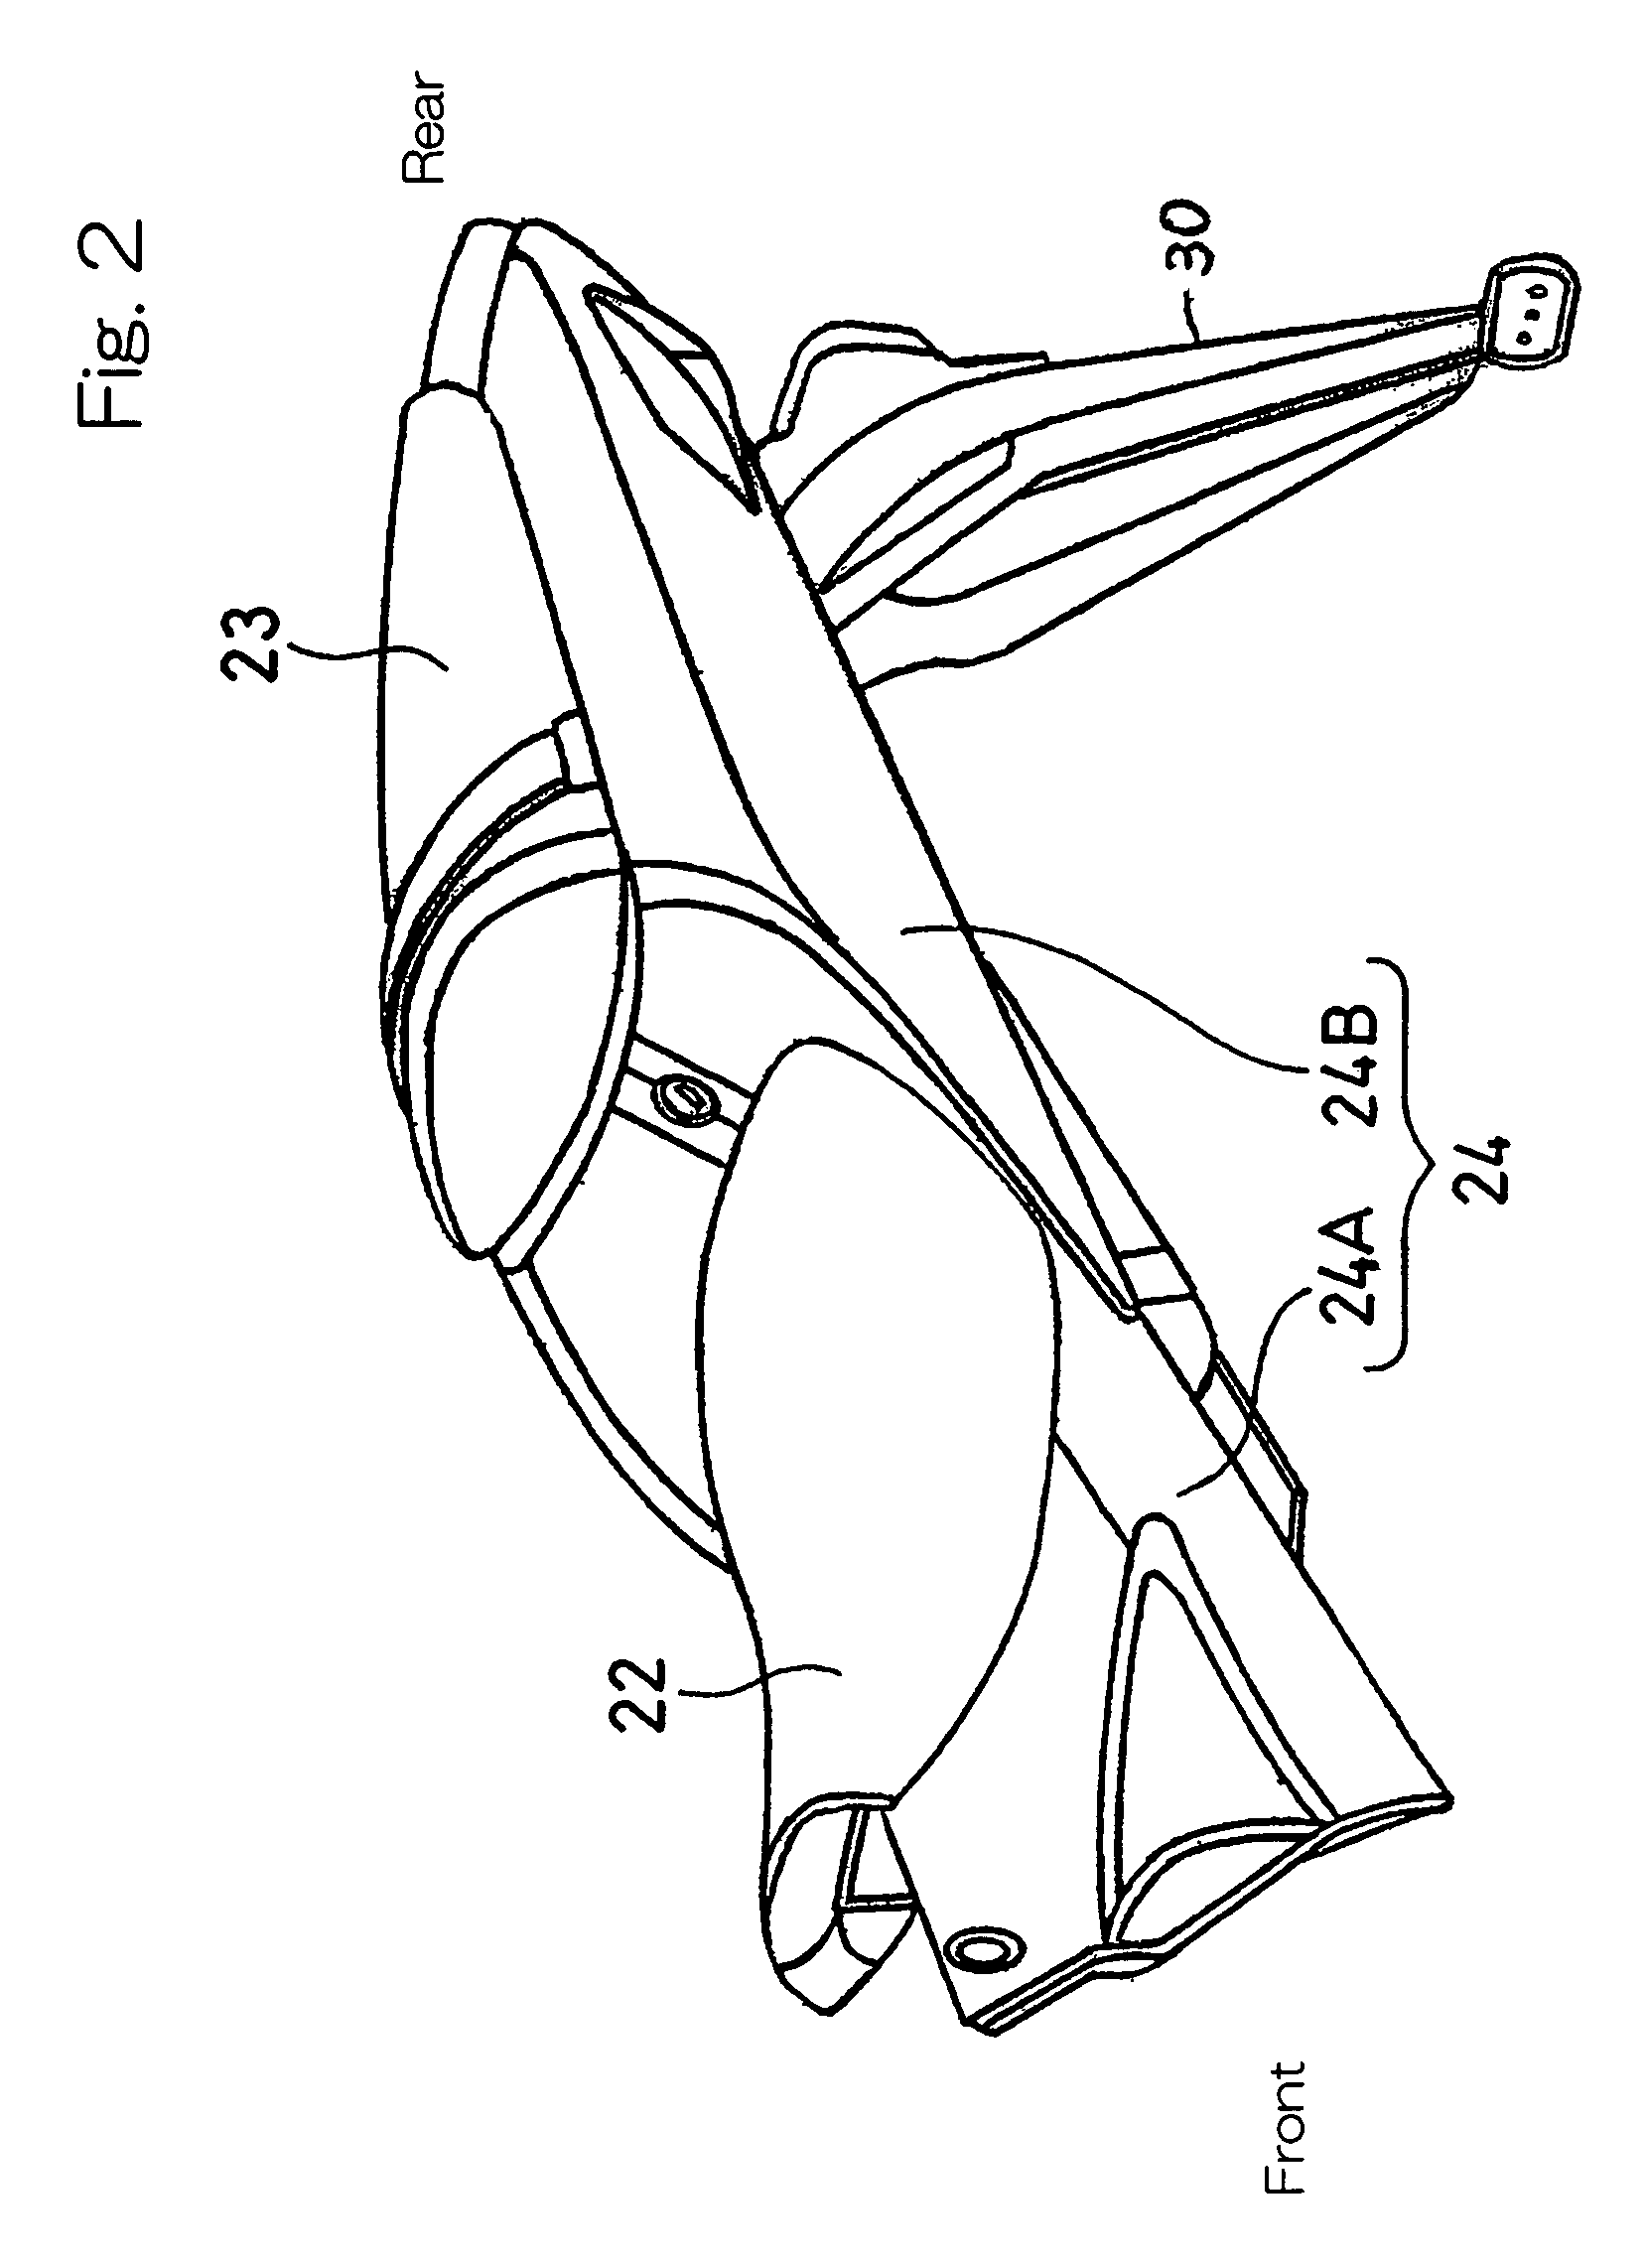 Guard structure for vehicle seat lock